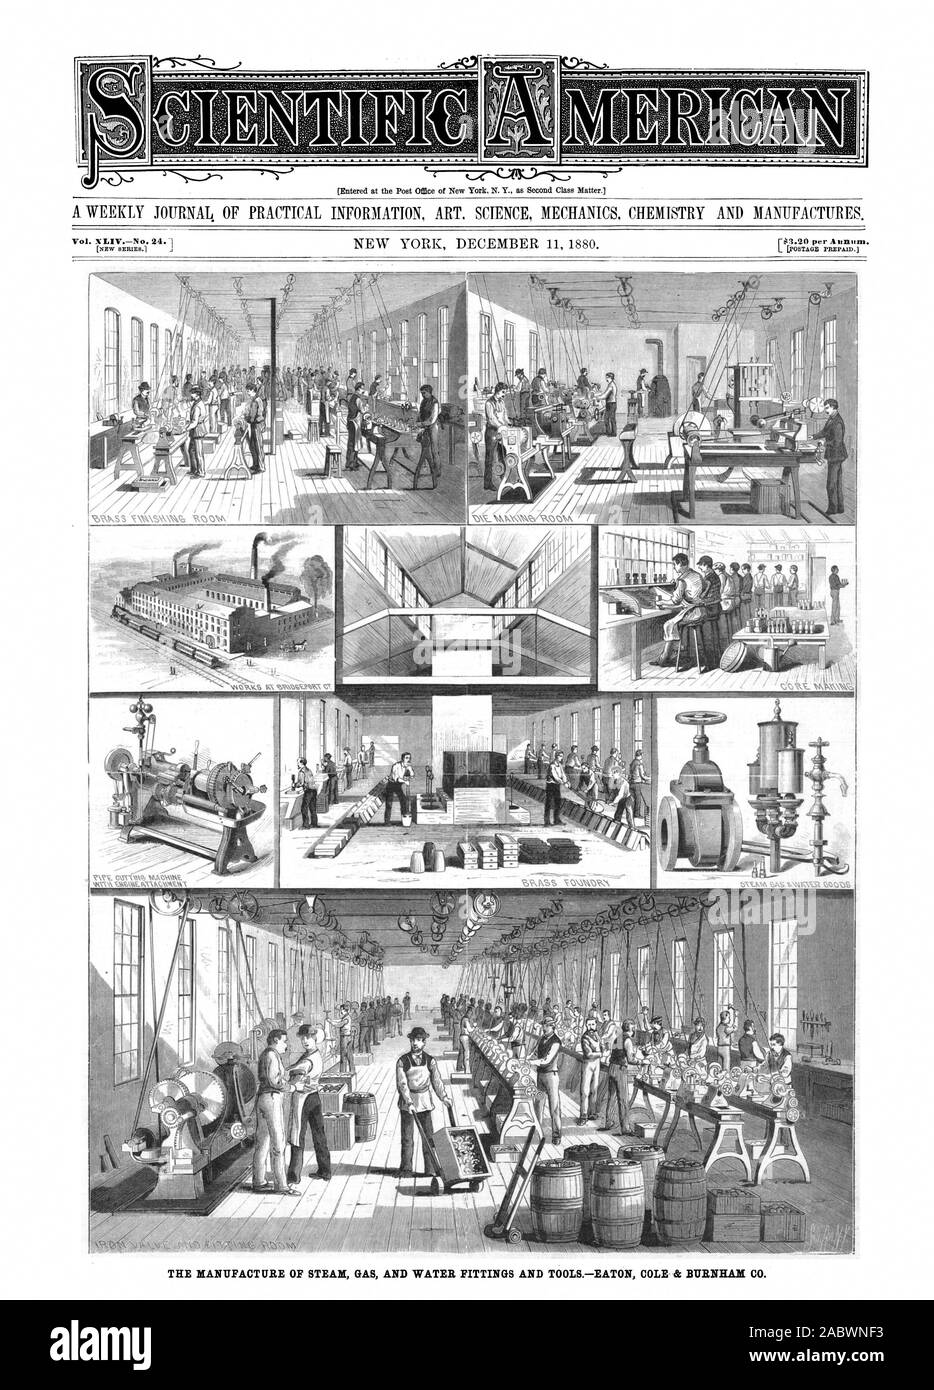 Entered at the Post Office of New York N. Y. as Second Class Matter. rt43.20 per Annum. [NEW SERIES. 01 0 (A'  ow Amen Aspon wiatiM, scientific american, 1880-12-11 Stock Photo